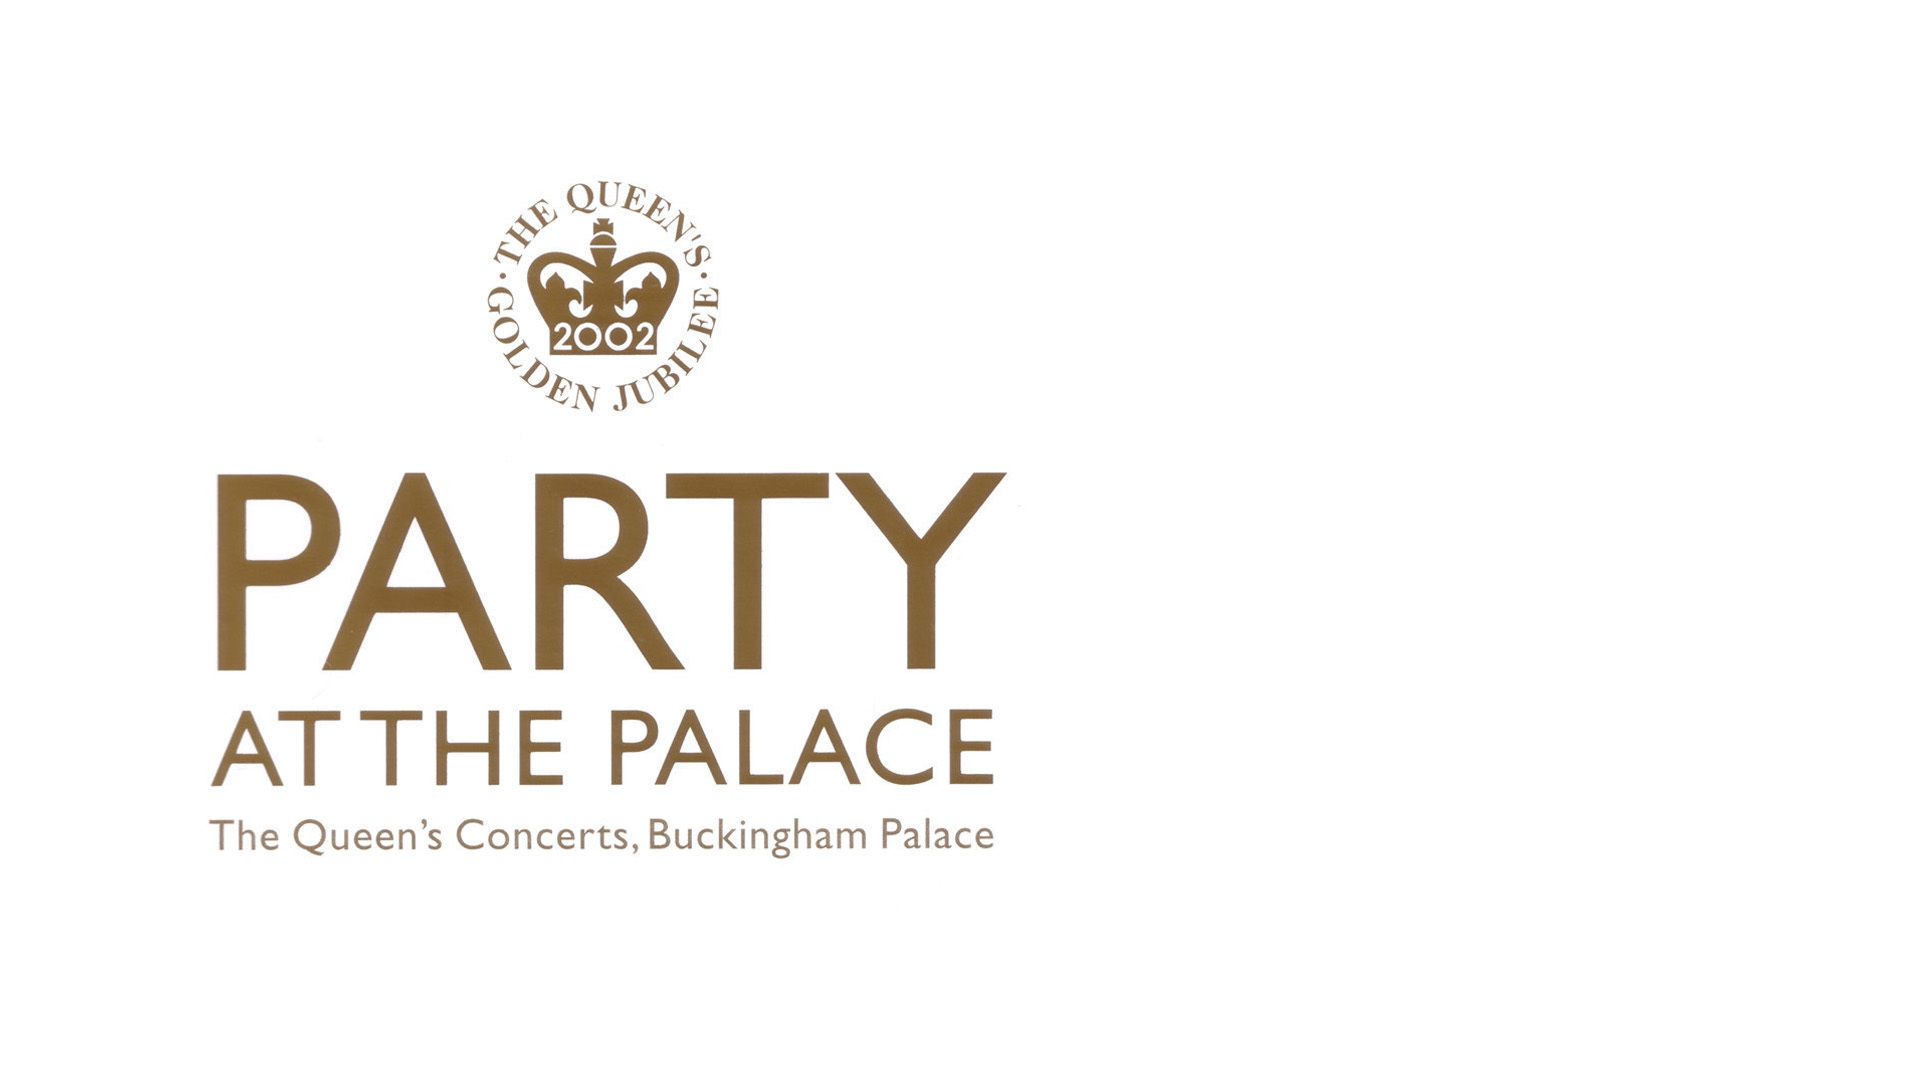 Party at the Palace: The Queen's Concerts, Buckingham Palace Backdrop